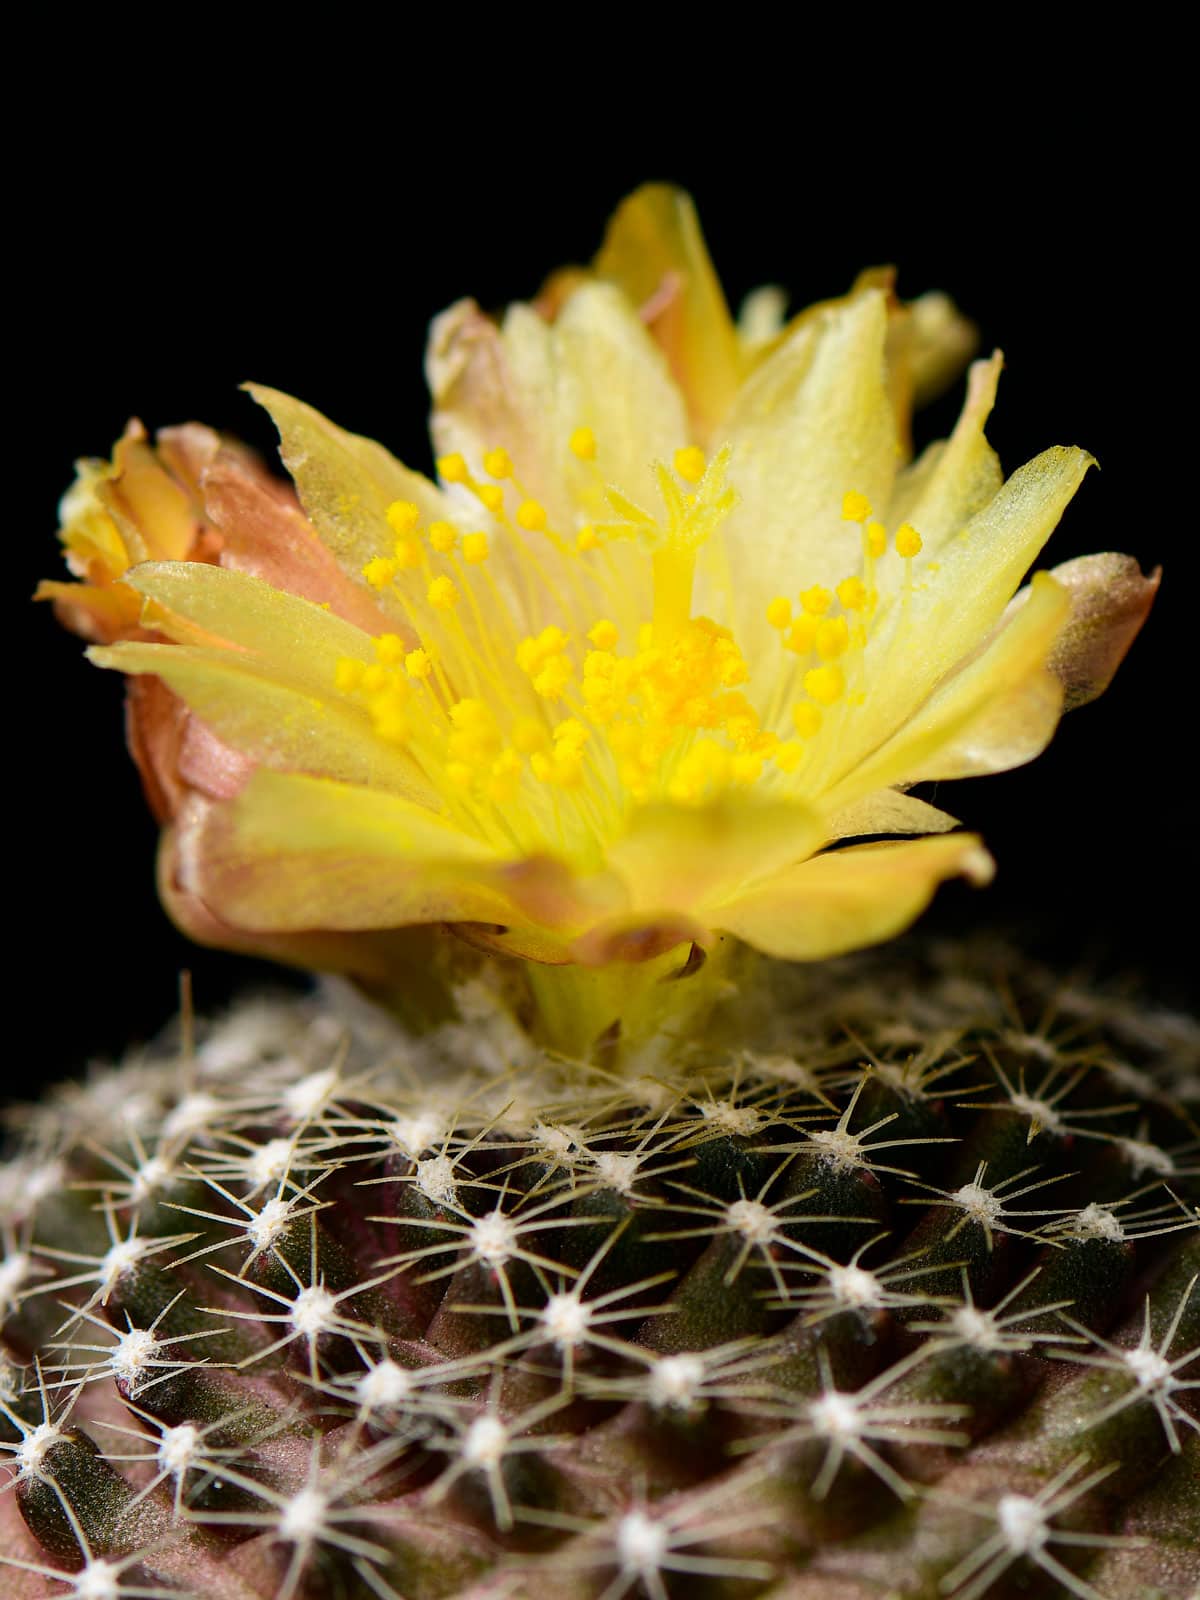 Gorgeous bright yellow flower of a Copiapoa Tenuissima photographed showing the 